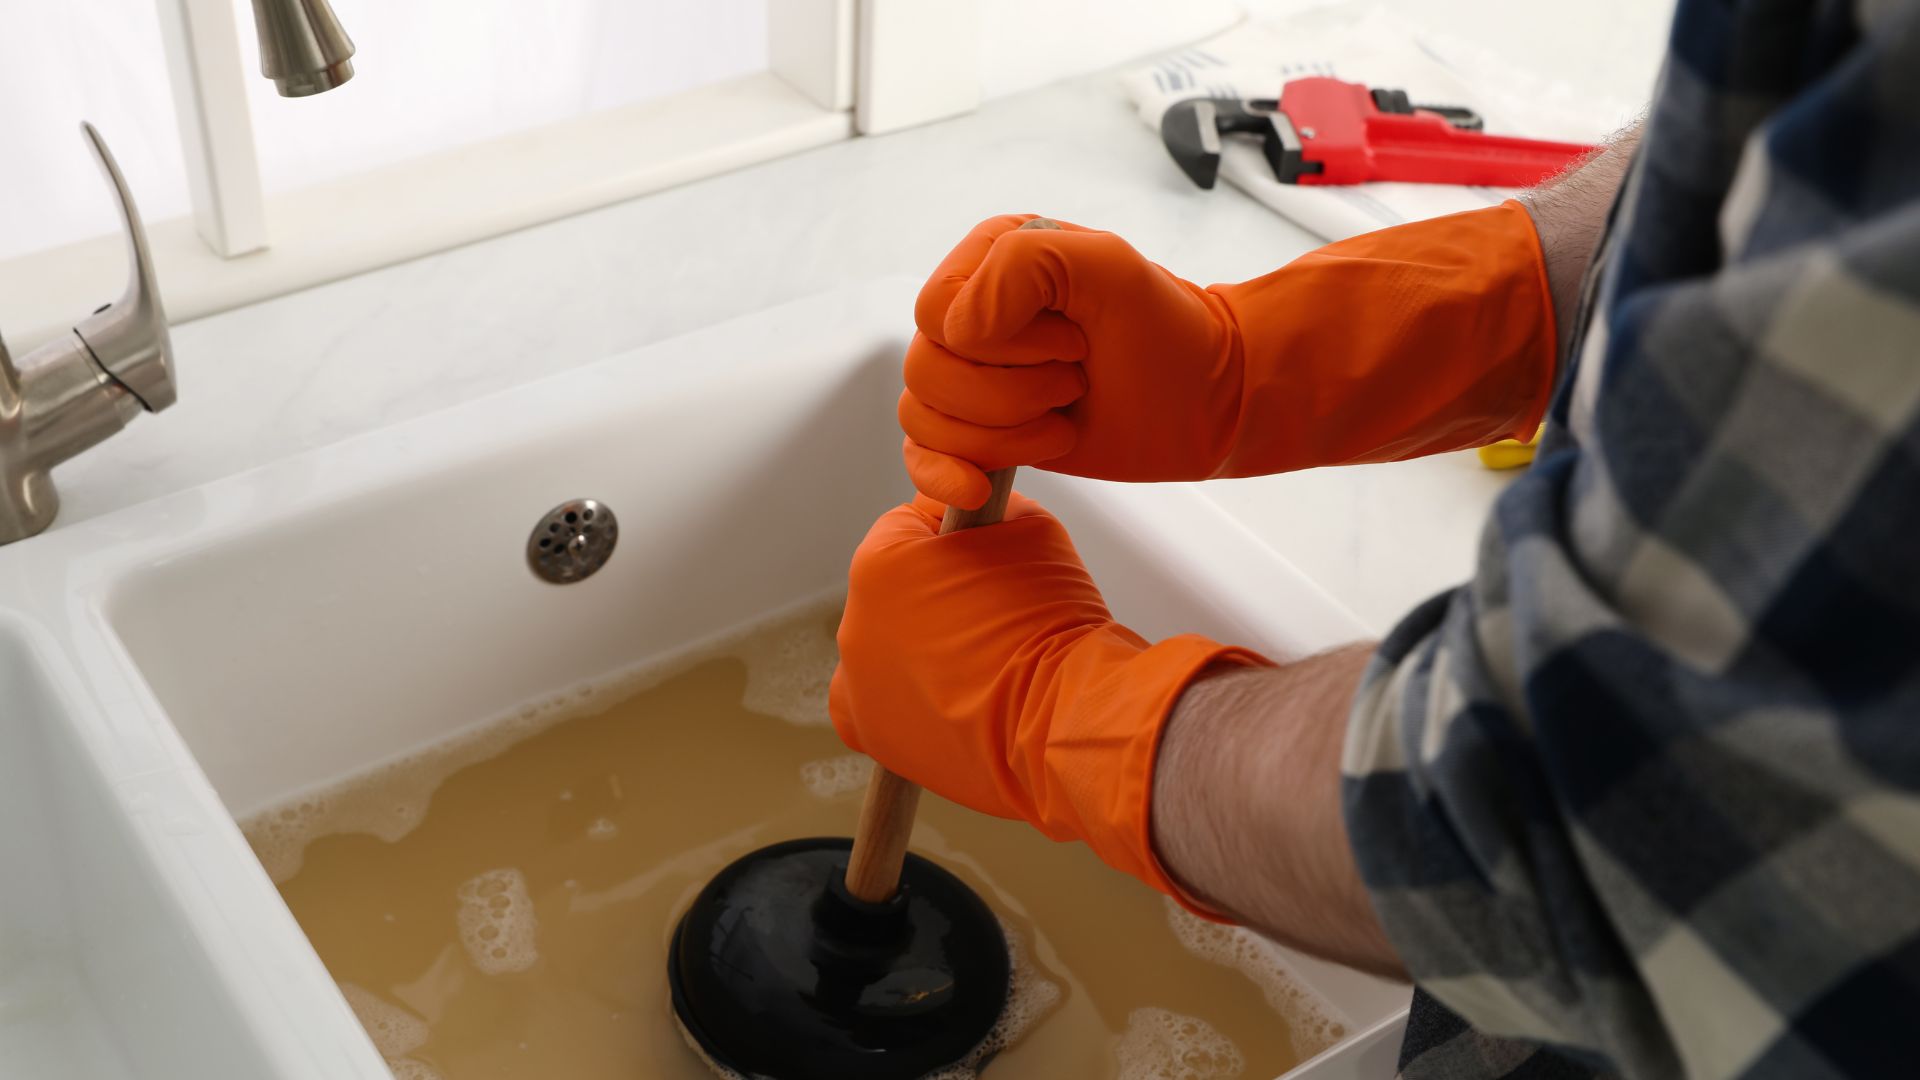 Blocked drains, a common issue addressed by plumbers to ensure smooth plumbing functionality.